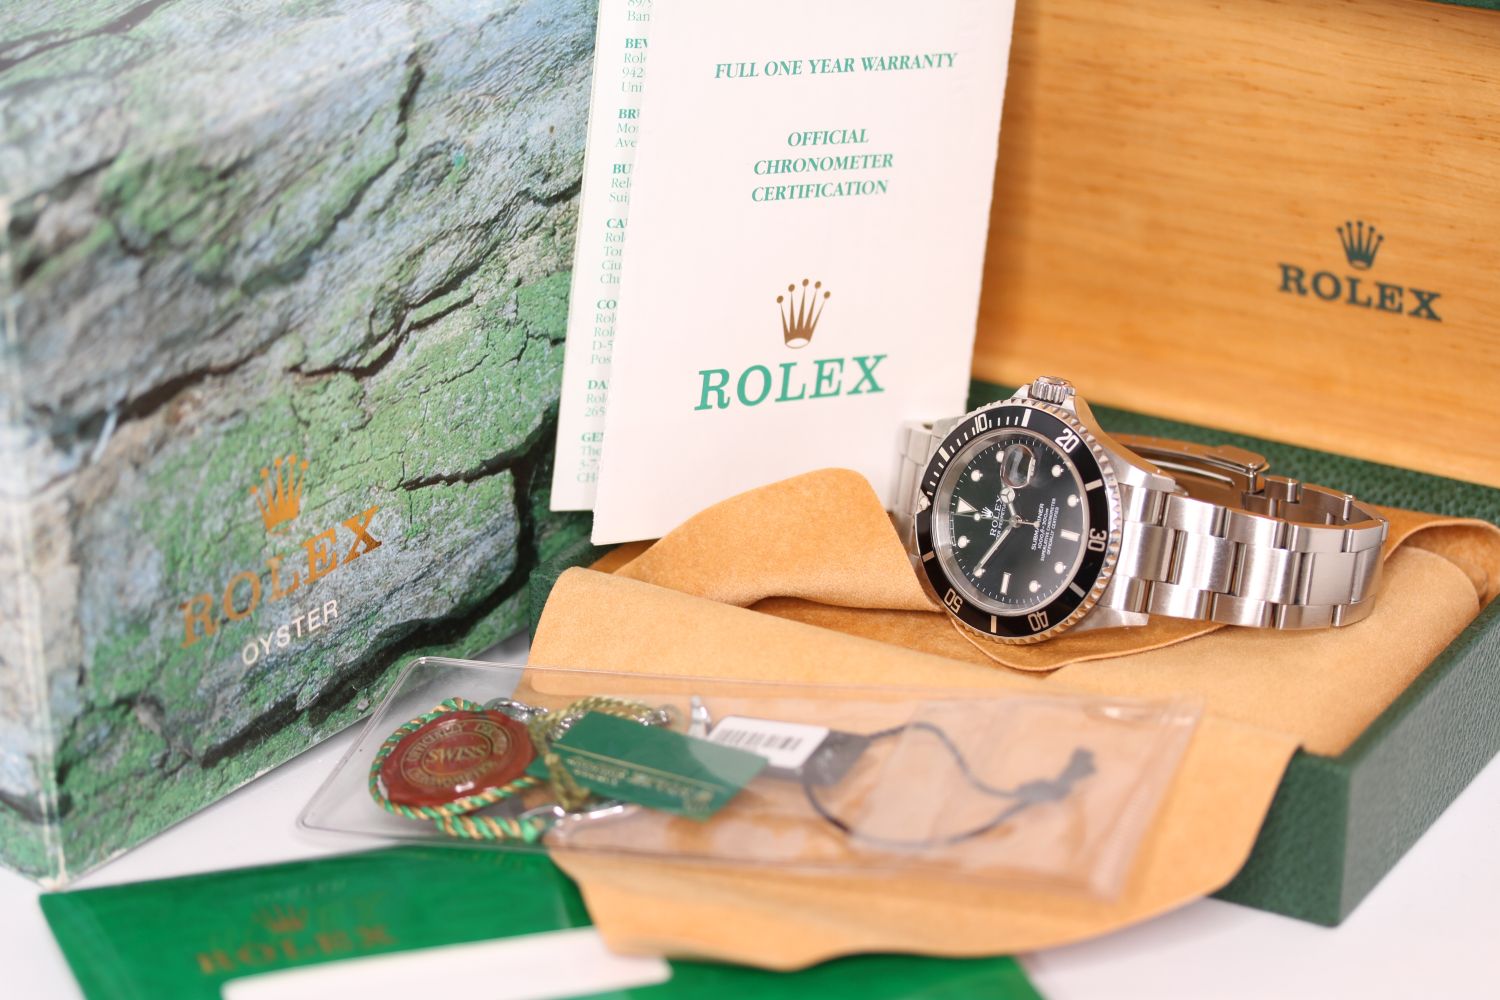 GENTLEMEN'S ROLEX OYSTER PERPETUAL SUBMARINER REFERENCE 16610 WITH BOX AND PAPERS CIRCA 2002,